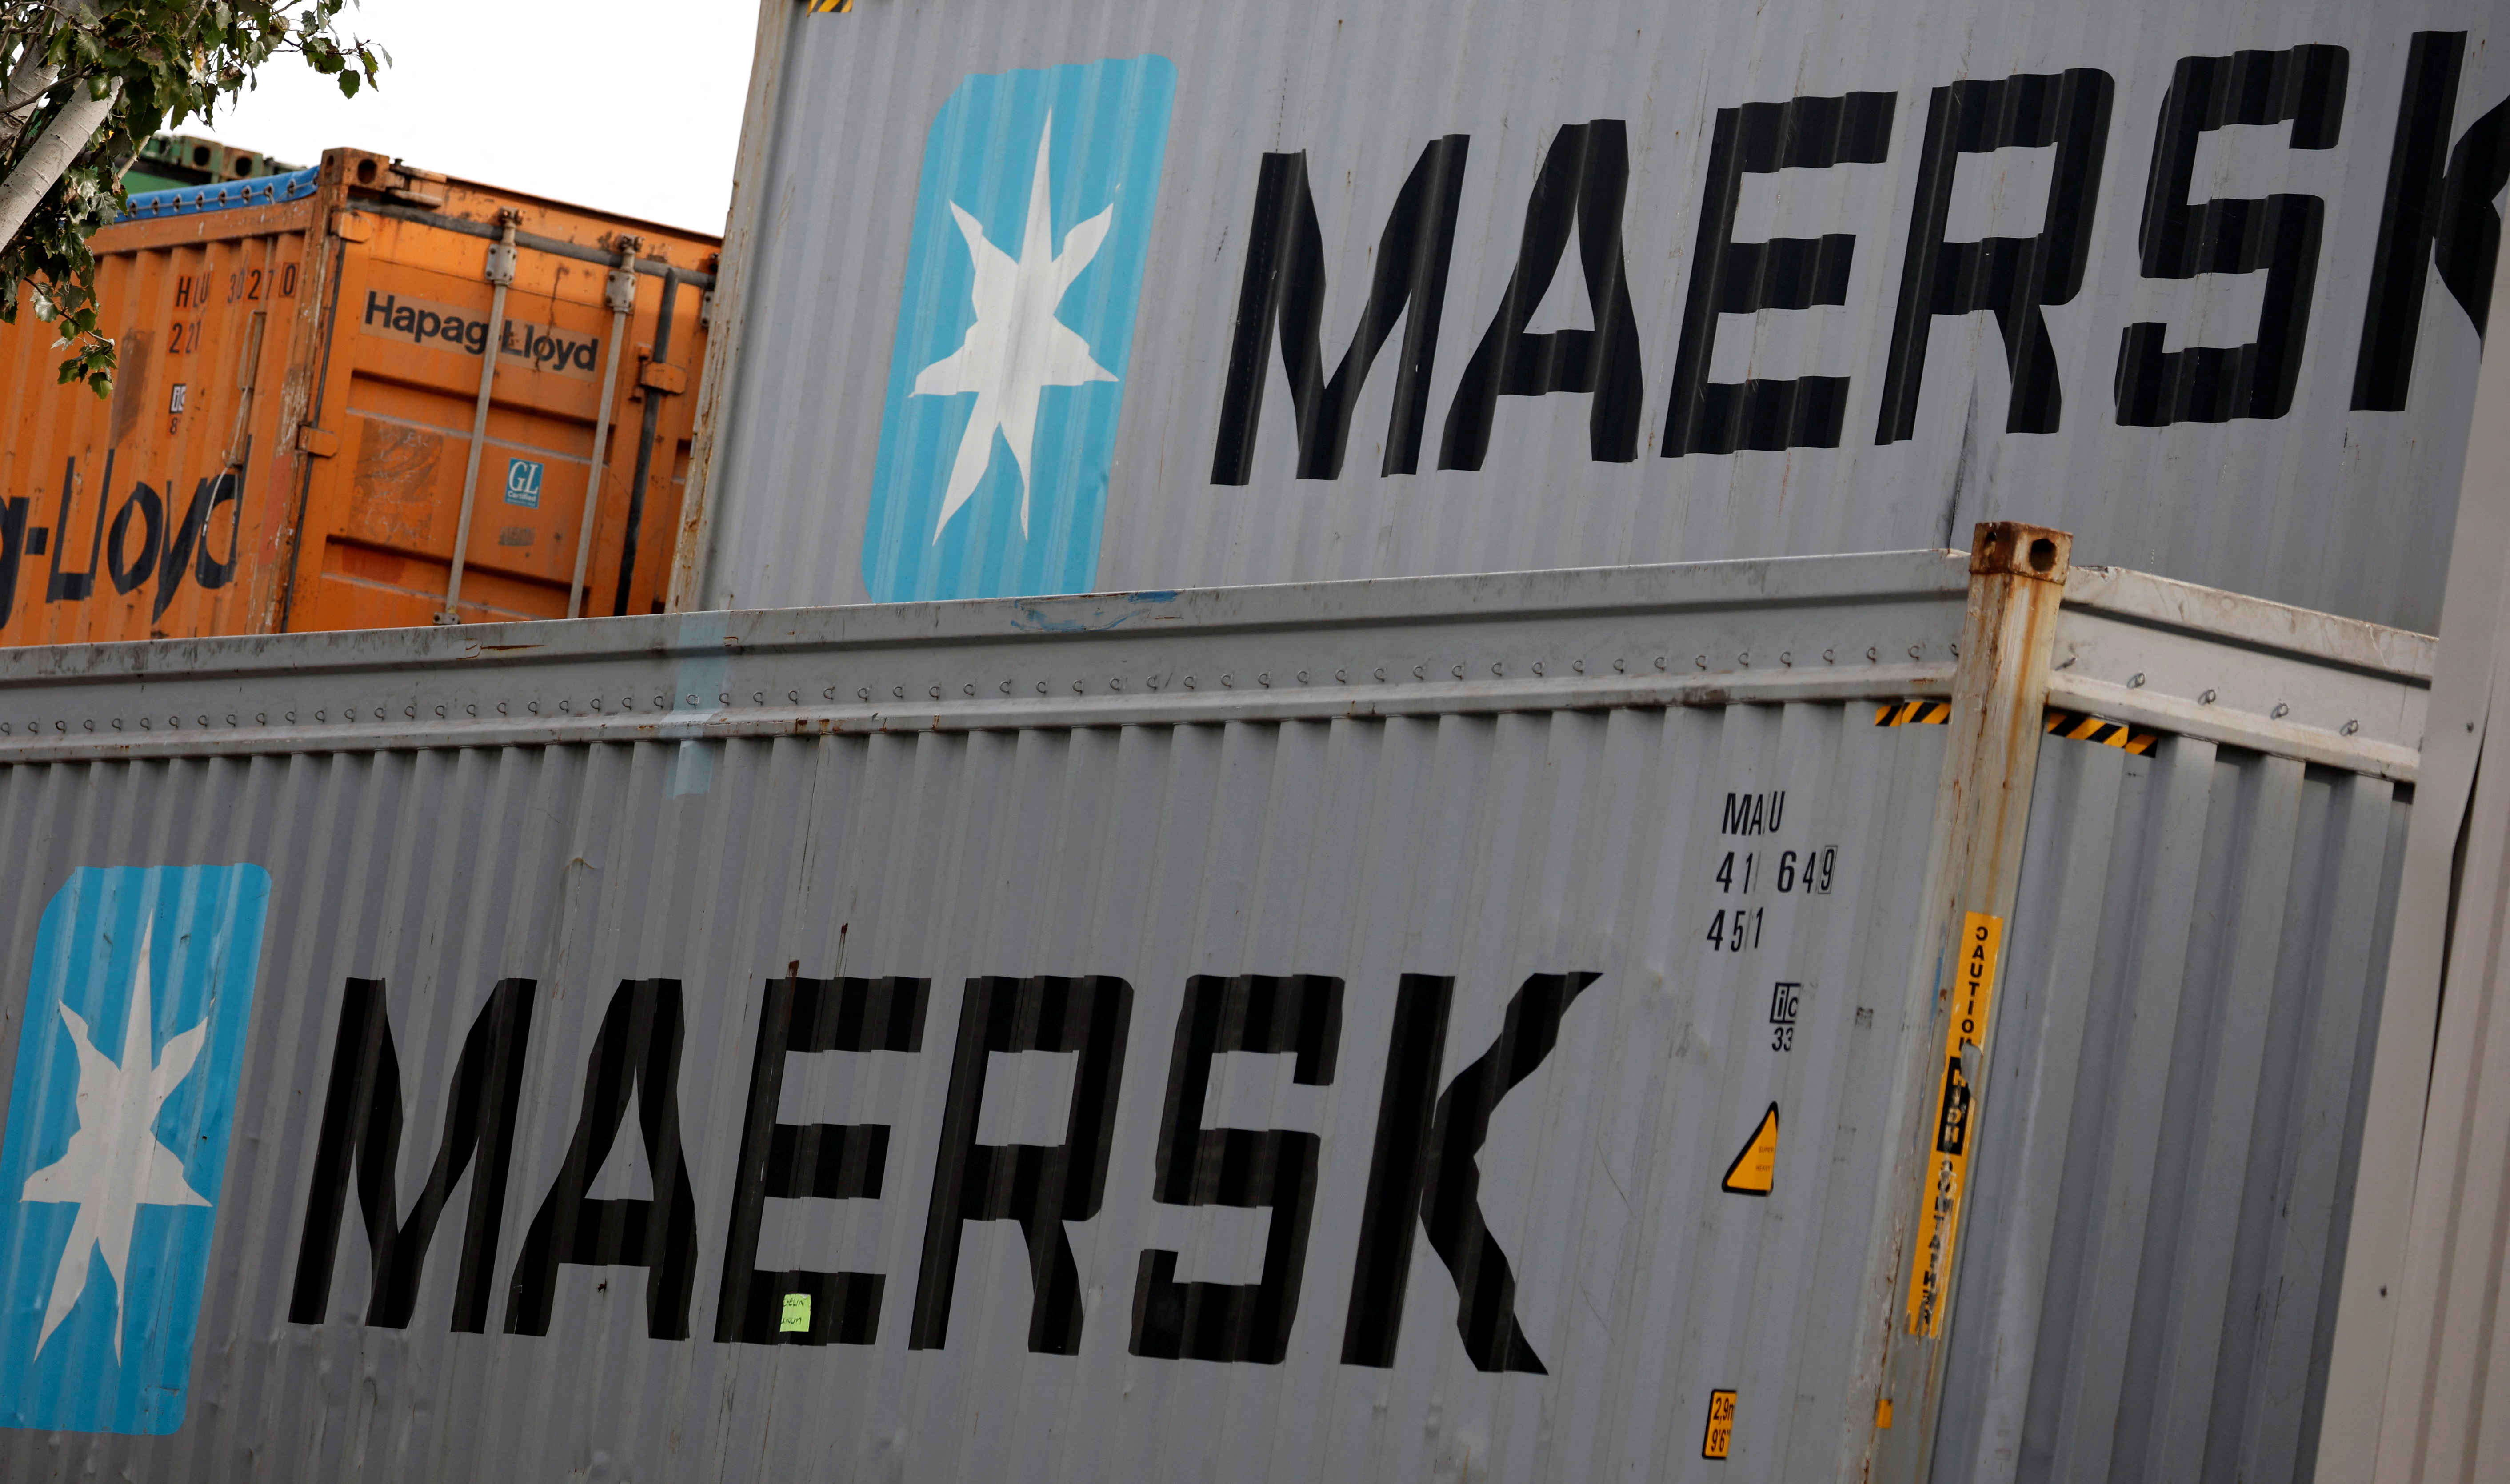 Maersk's logo is seen in stored containers at Zona Franca in Barcelona